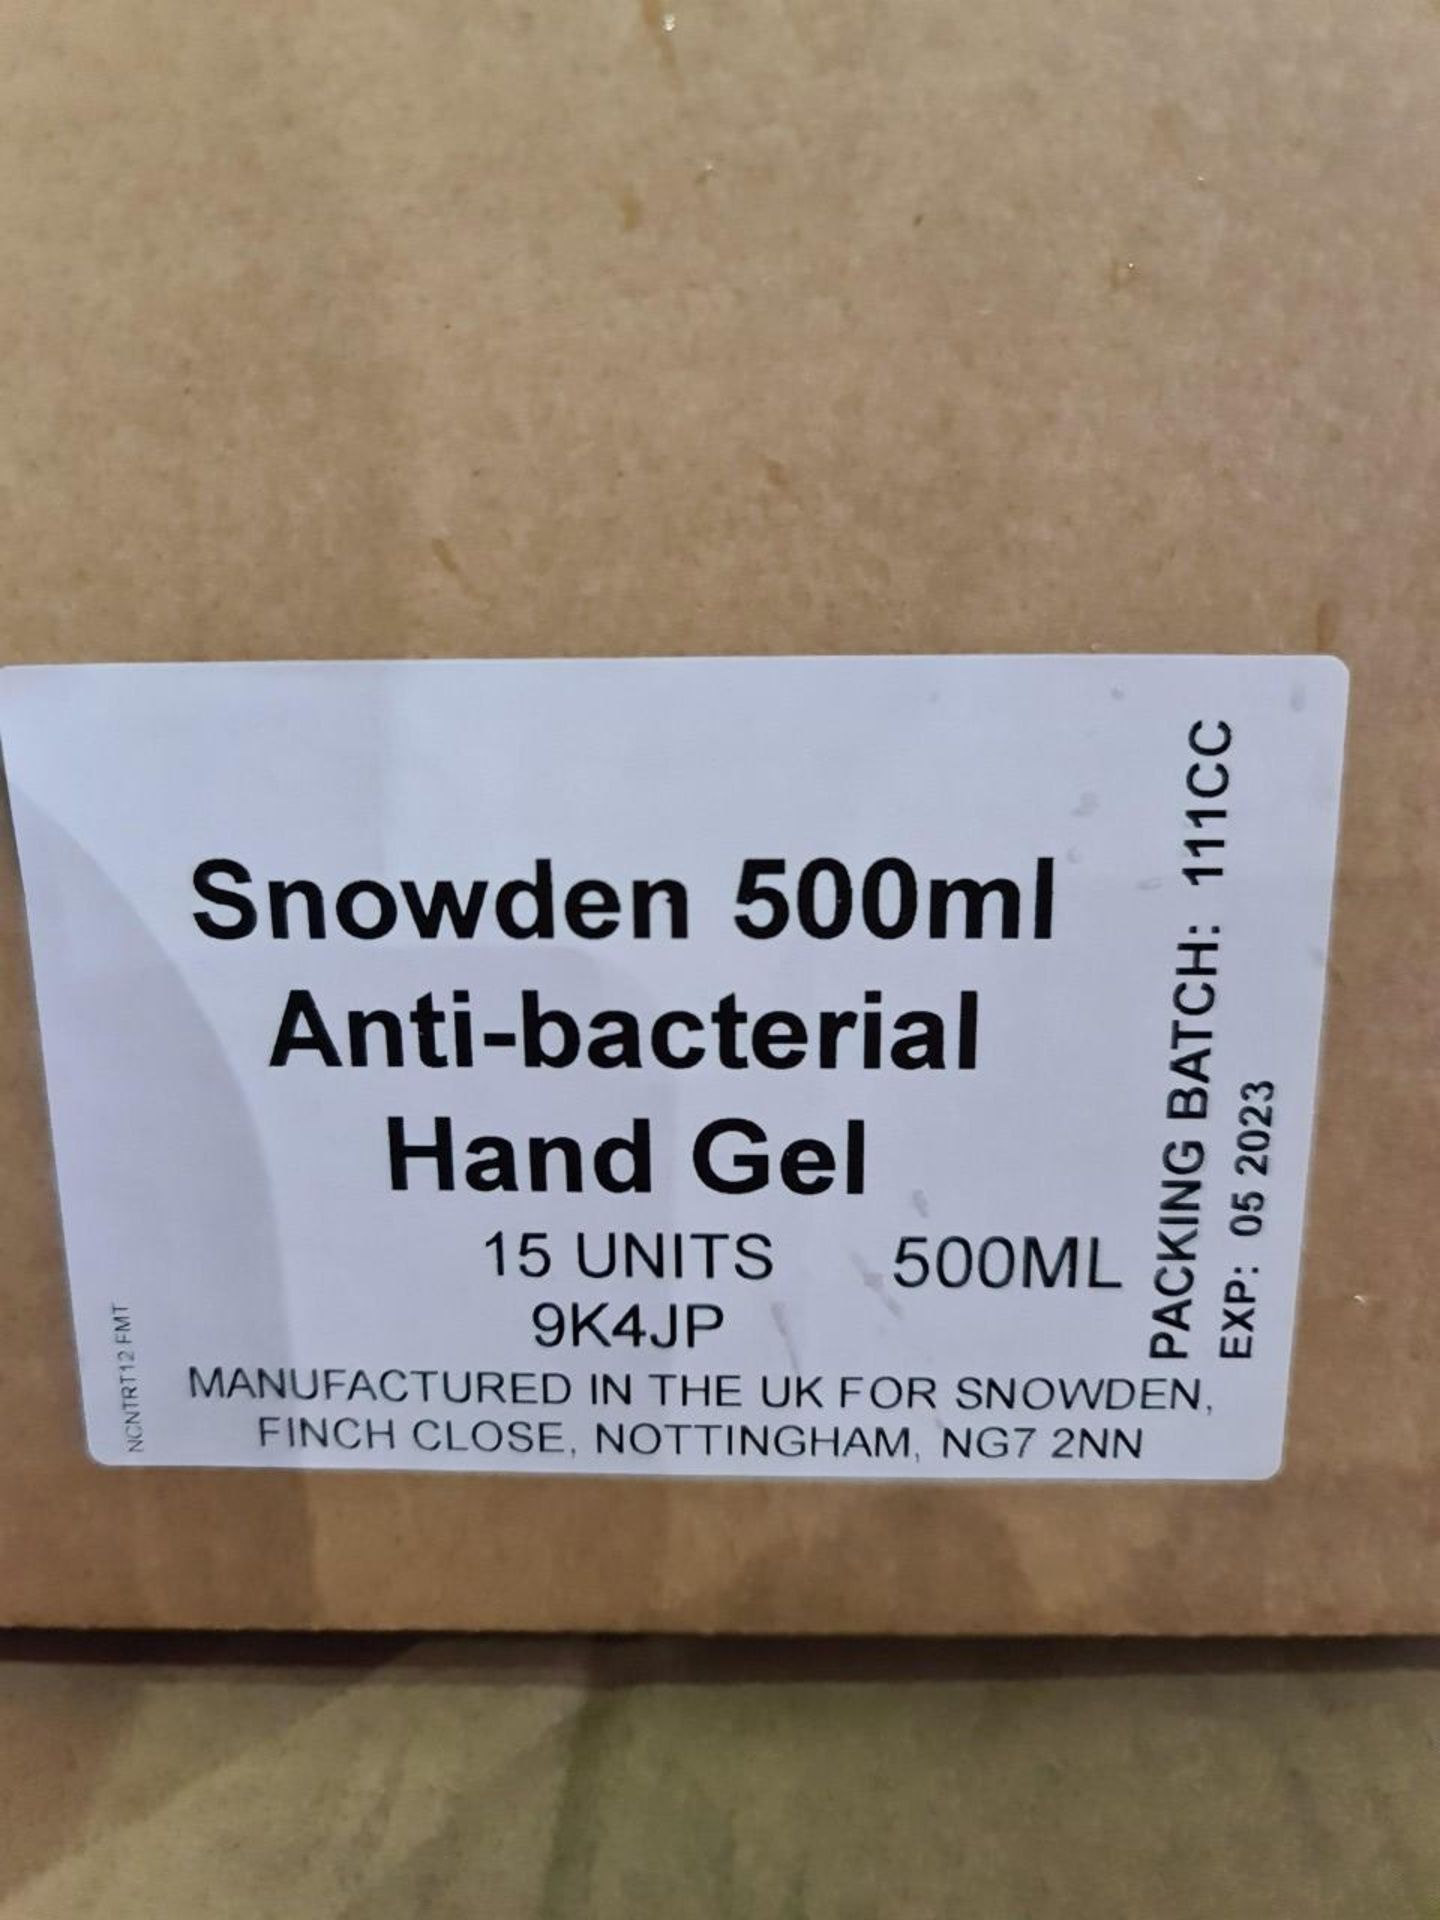 5,880 units of Snowden 500ml Anti-Bacterial Hand Gel Sanitiser - 70% Alcohol. RRP £6.99 per bottle - Image 4 of 5